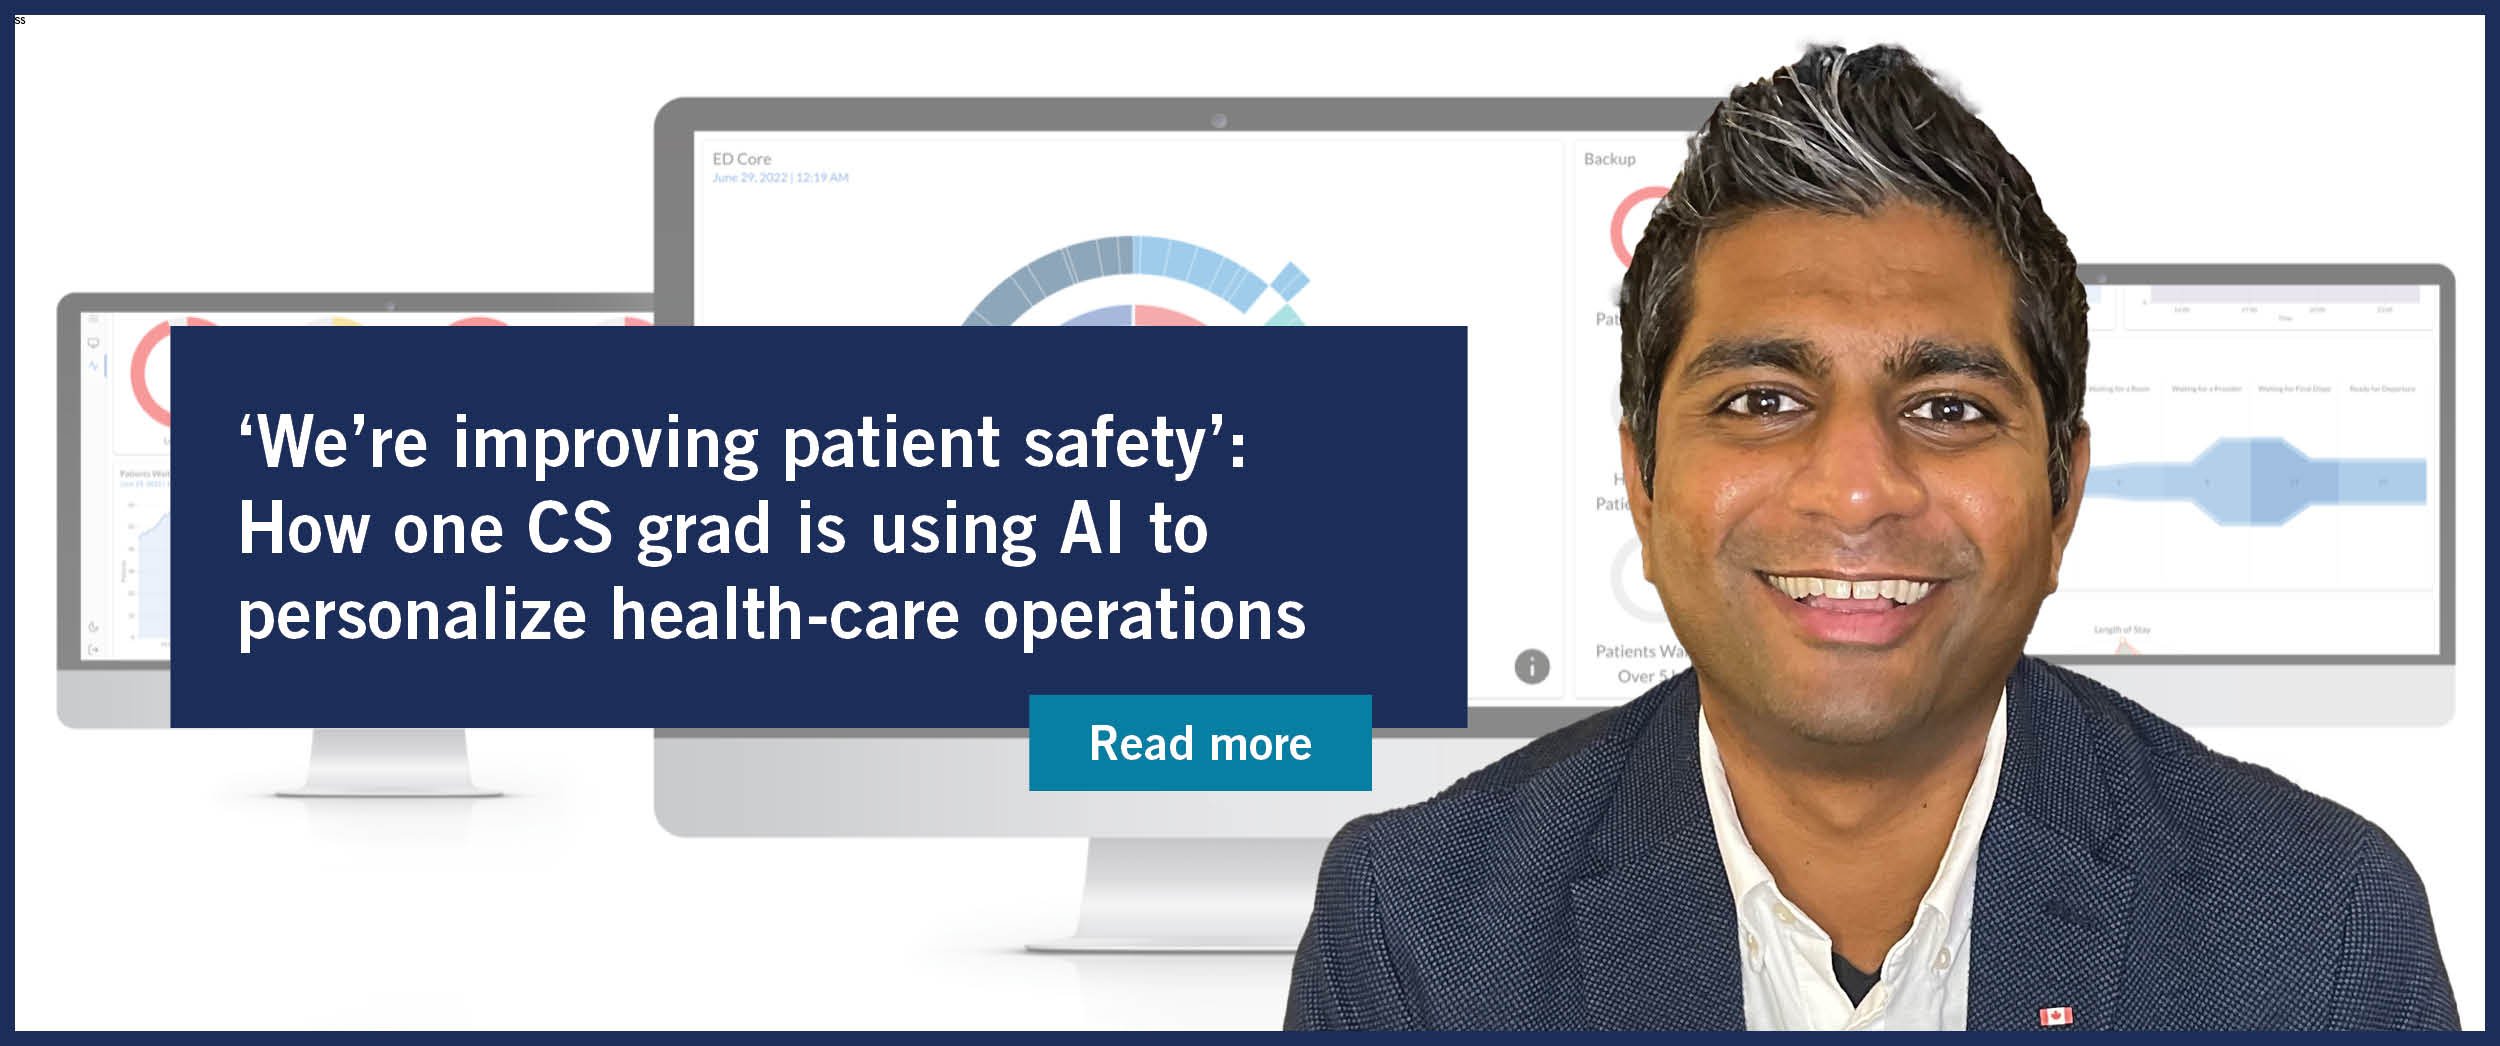 ‘We’re improving patient safety’: How one CS grad is using AI to personalize health-care operations